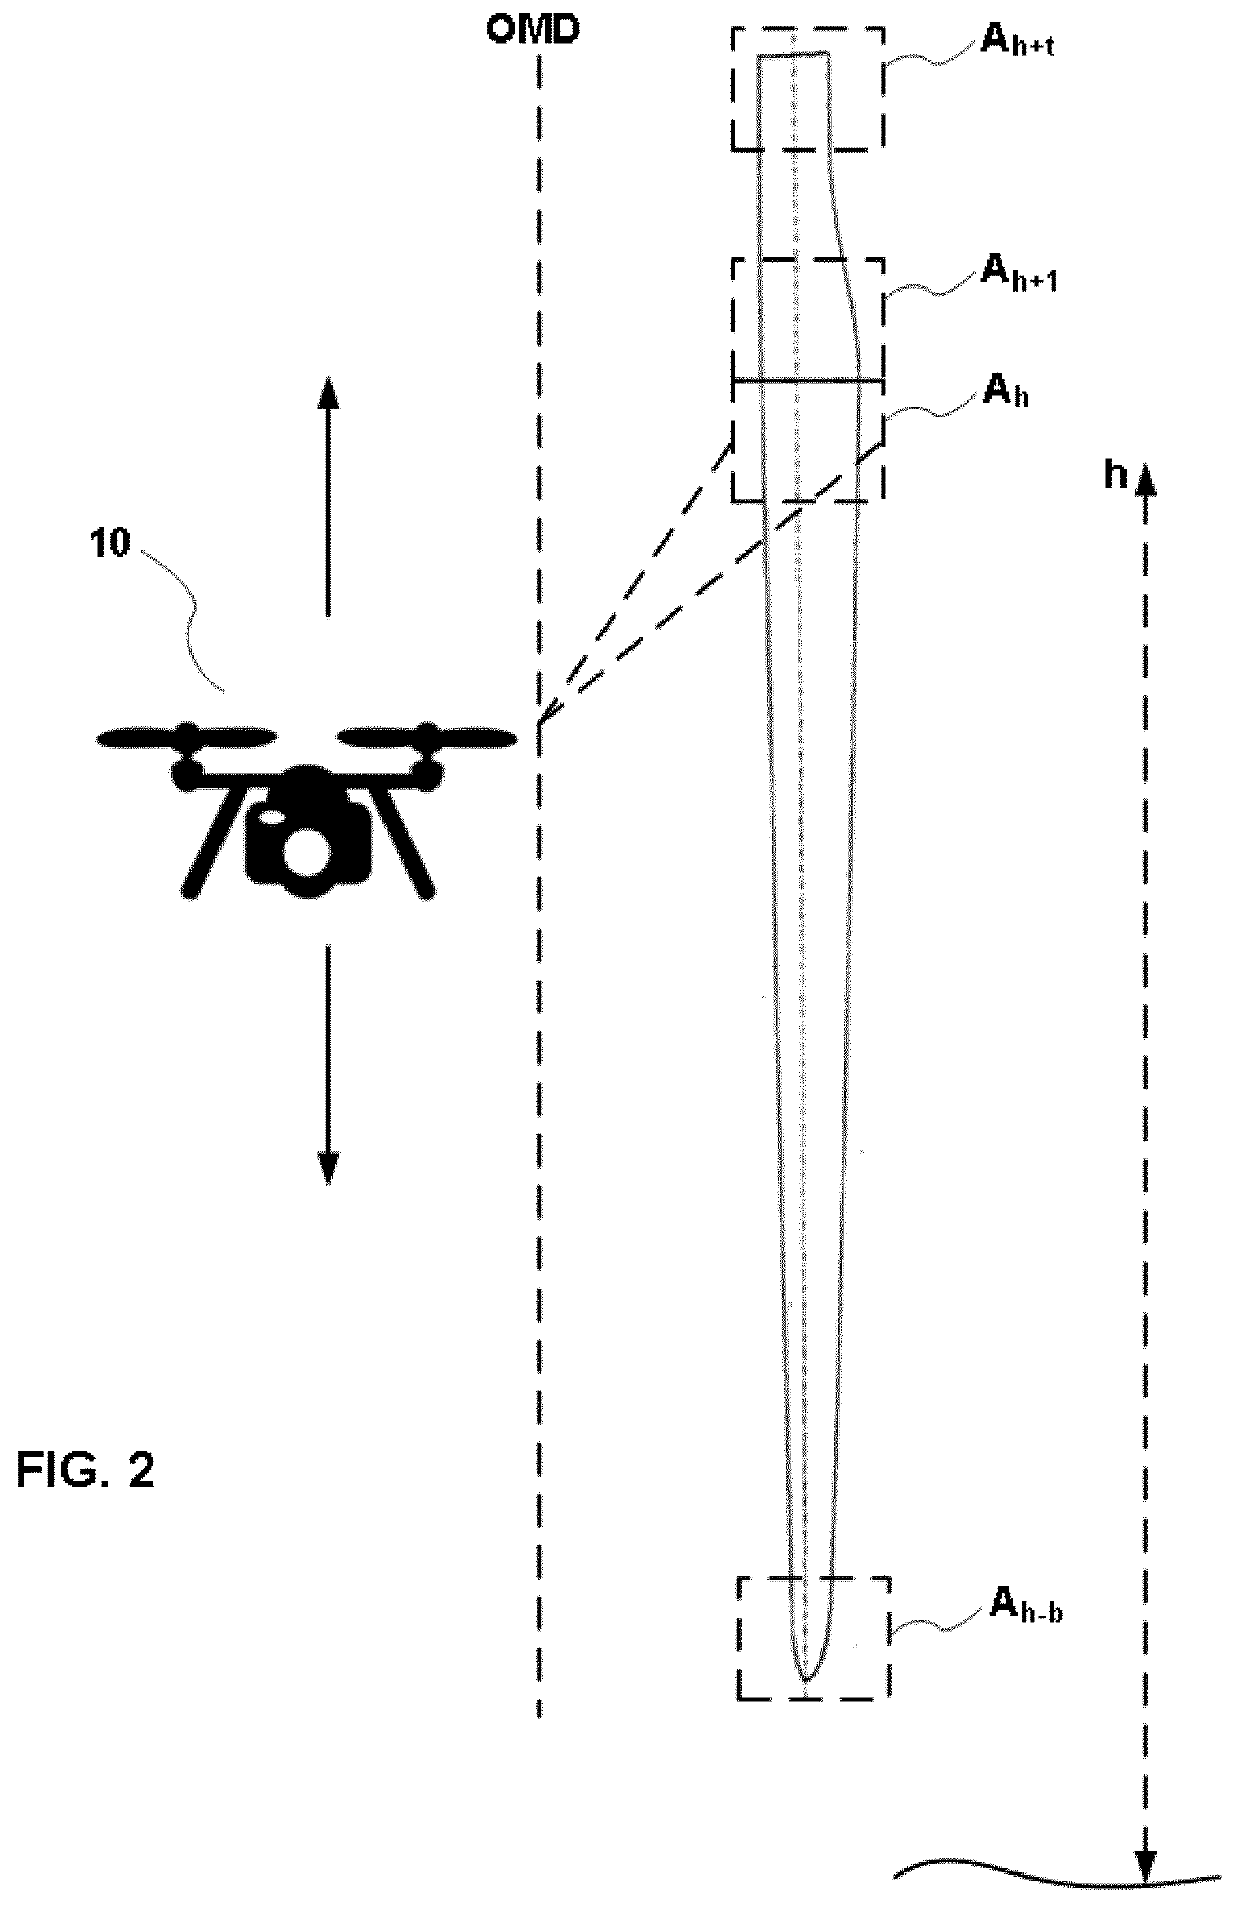 Autonomous inspection of elongated structures using unmanned aerial vehicles